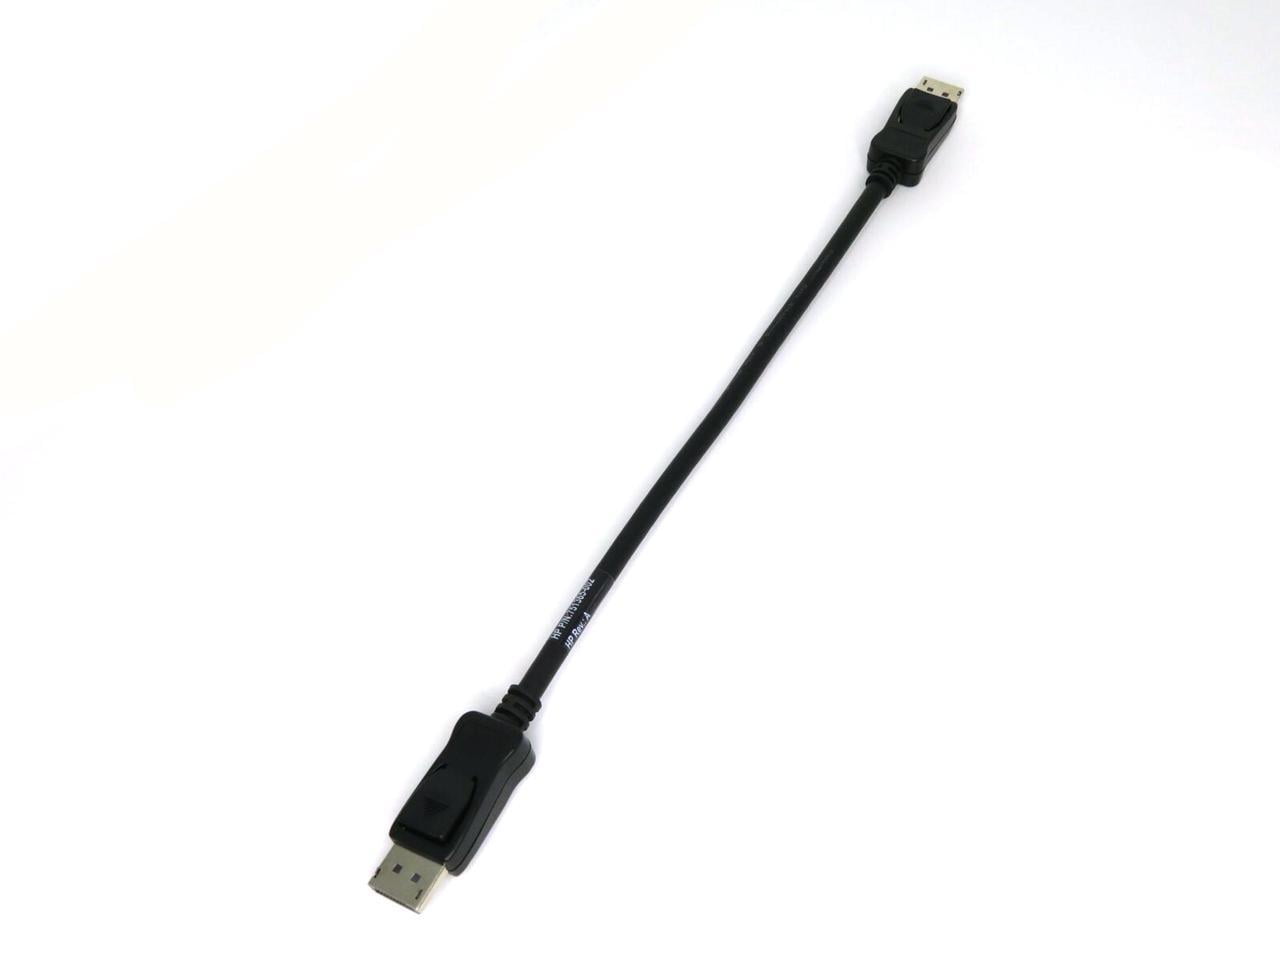 lot 10 hp 405520-001 DVI-D Monitor computer Cable DVI Enabled Flat Panel lcd